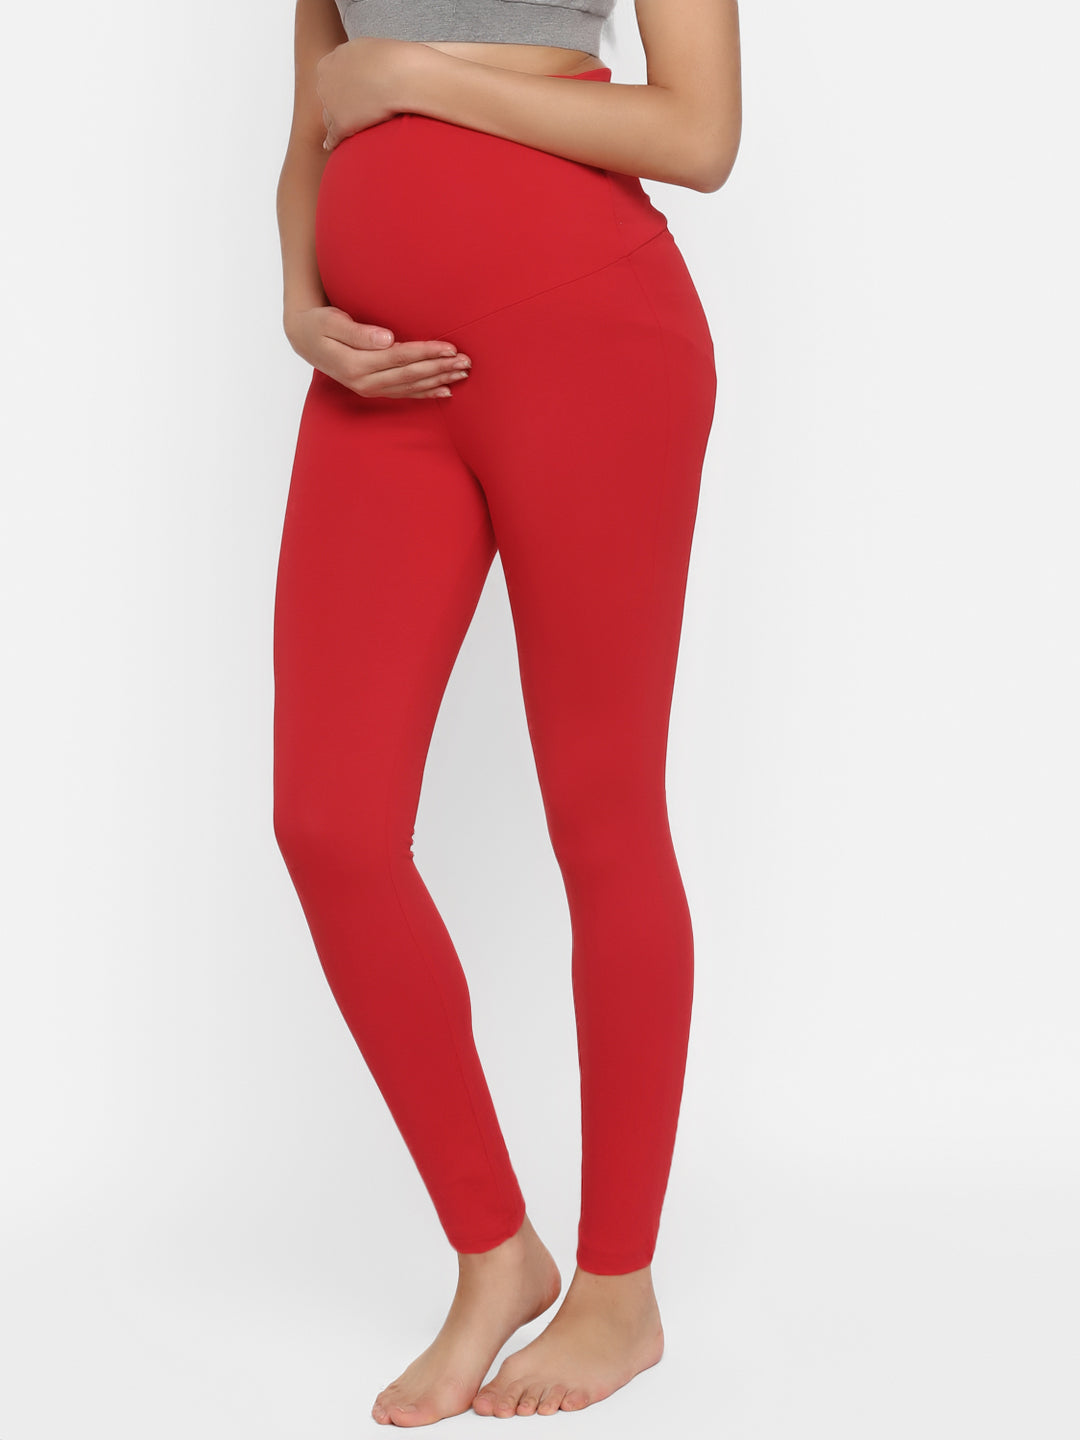 High Waisted Red Pregnancy Leggings with Pockets